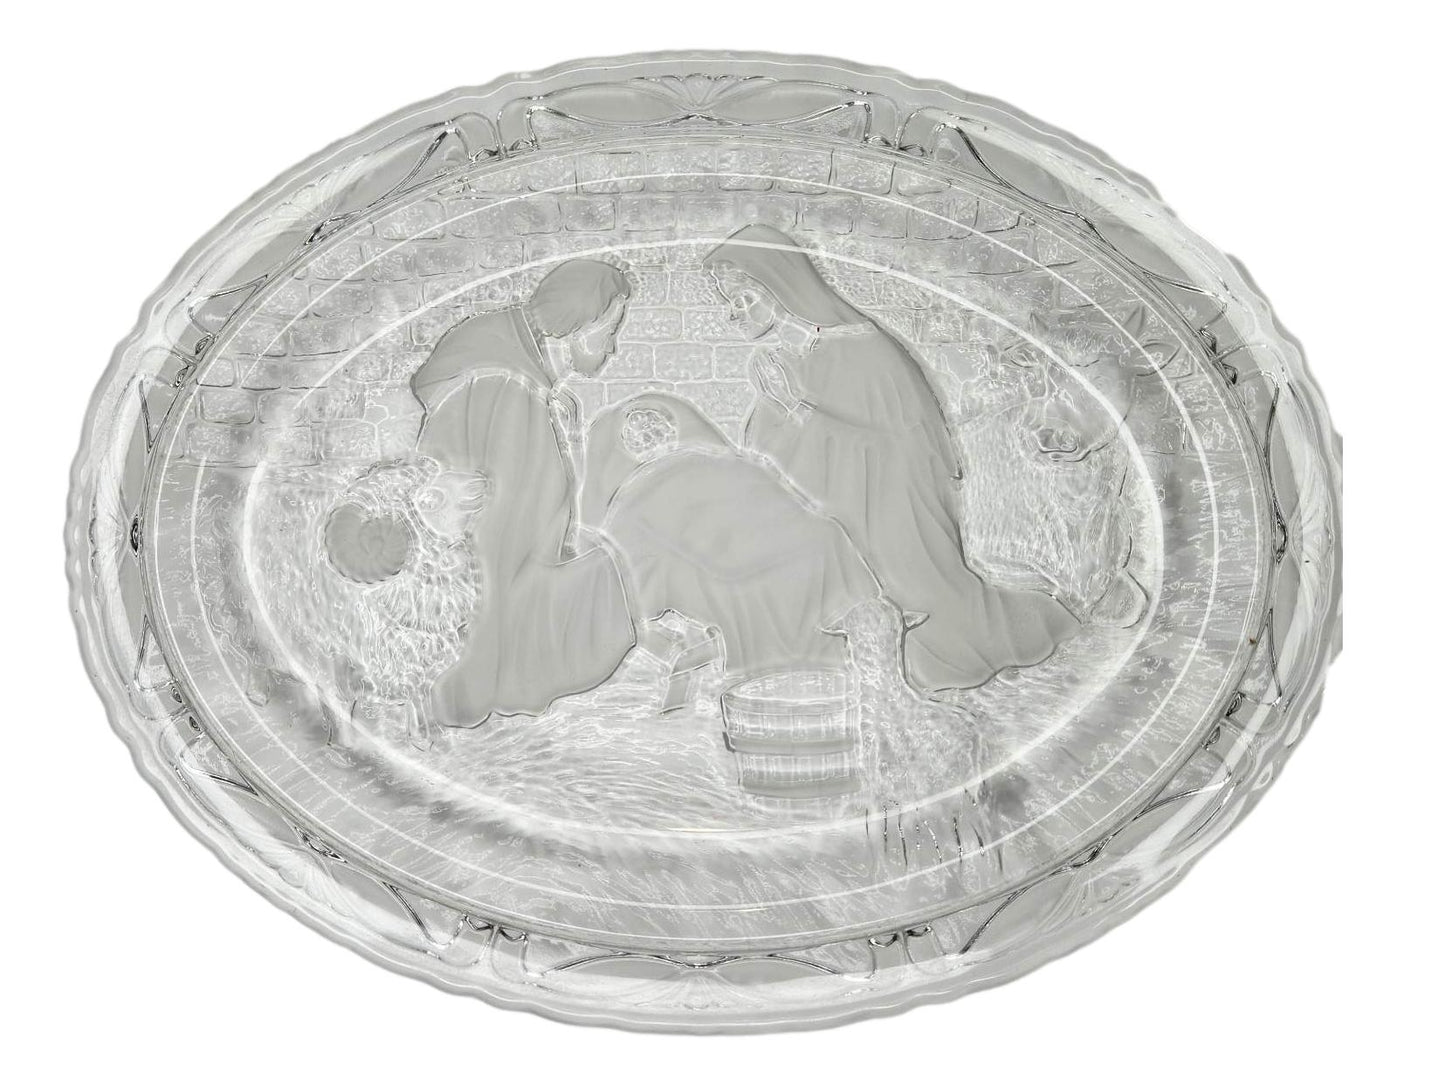 Nativity Frosted Plate L: 9.5 inches X W: 7 inches